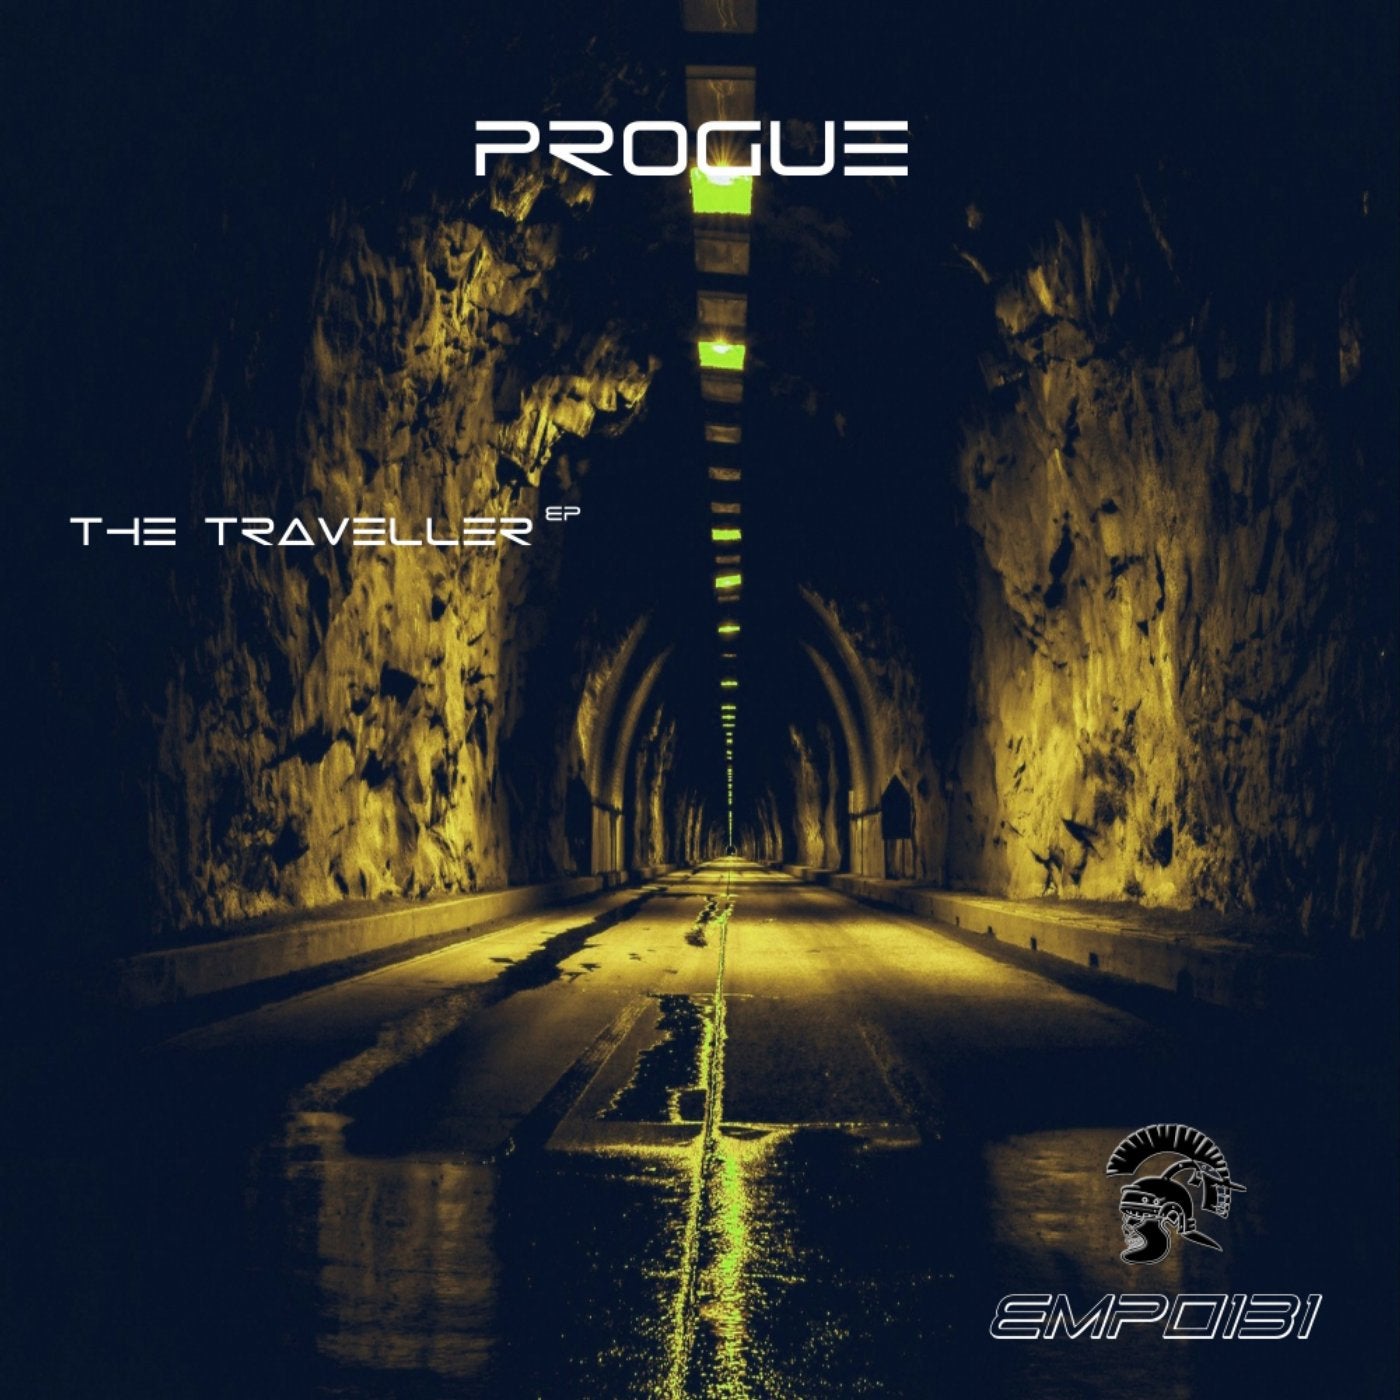 The Traveller Ep